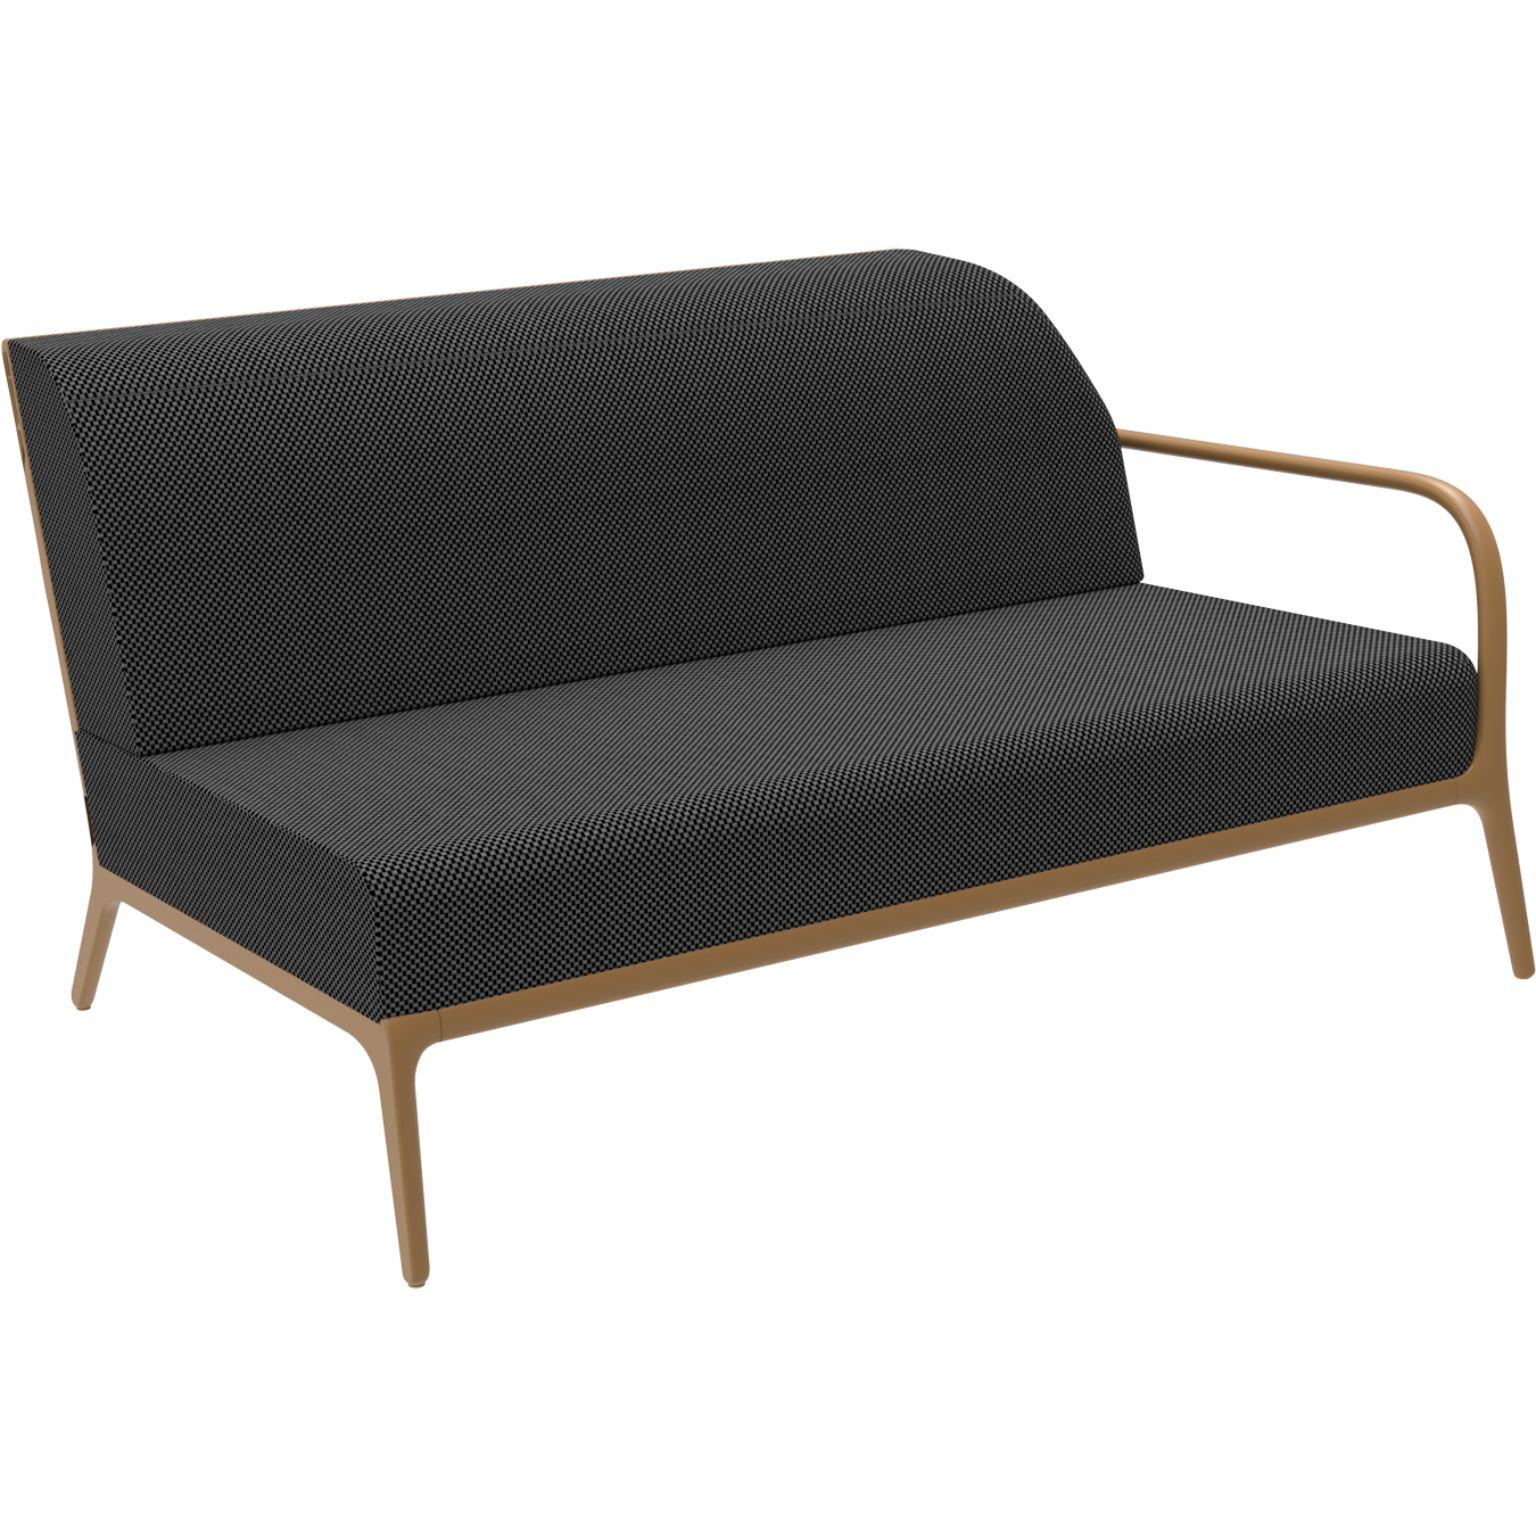 Xaloc Left 160 Gold Modular sofa by MOWEE
Dimensions: D100 x W160 x H81 cm (Seat Height 42cm)
Material: Aluminium, Textile
Weight: 37 kg
Also Available in different colors and finishes. 

 Xaloc synthesizes the lines of interior furniture to